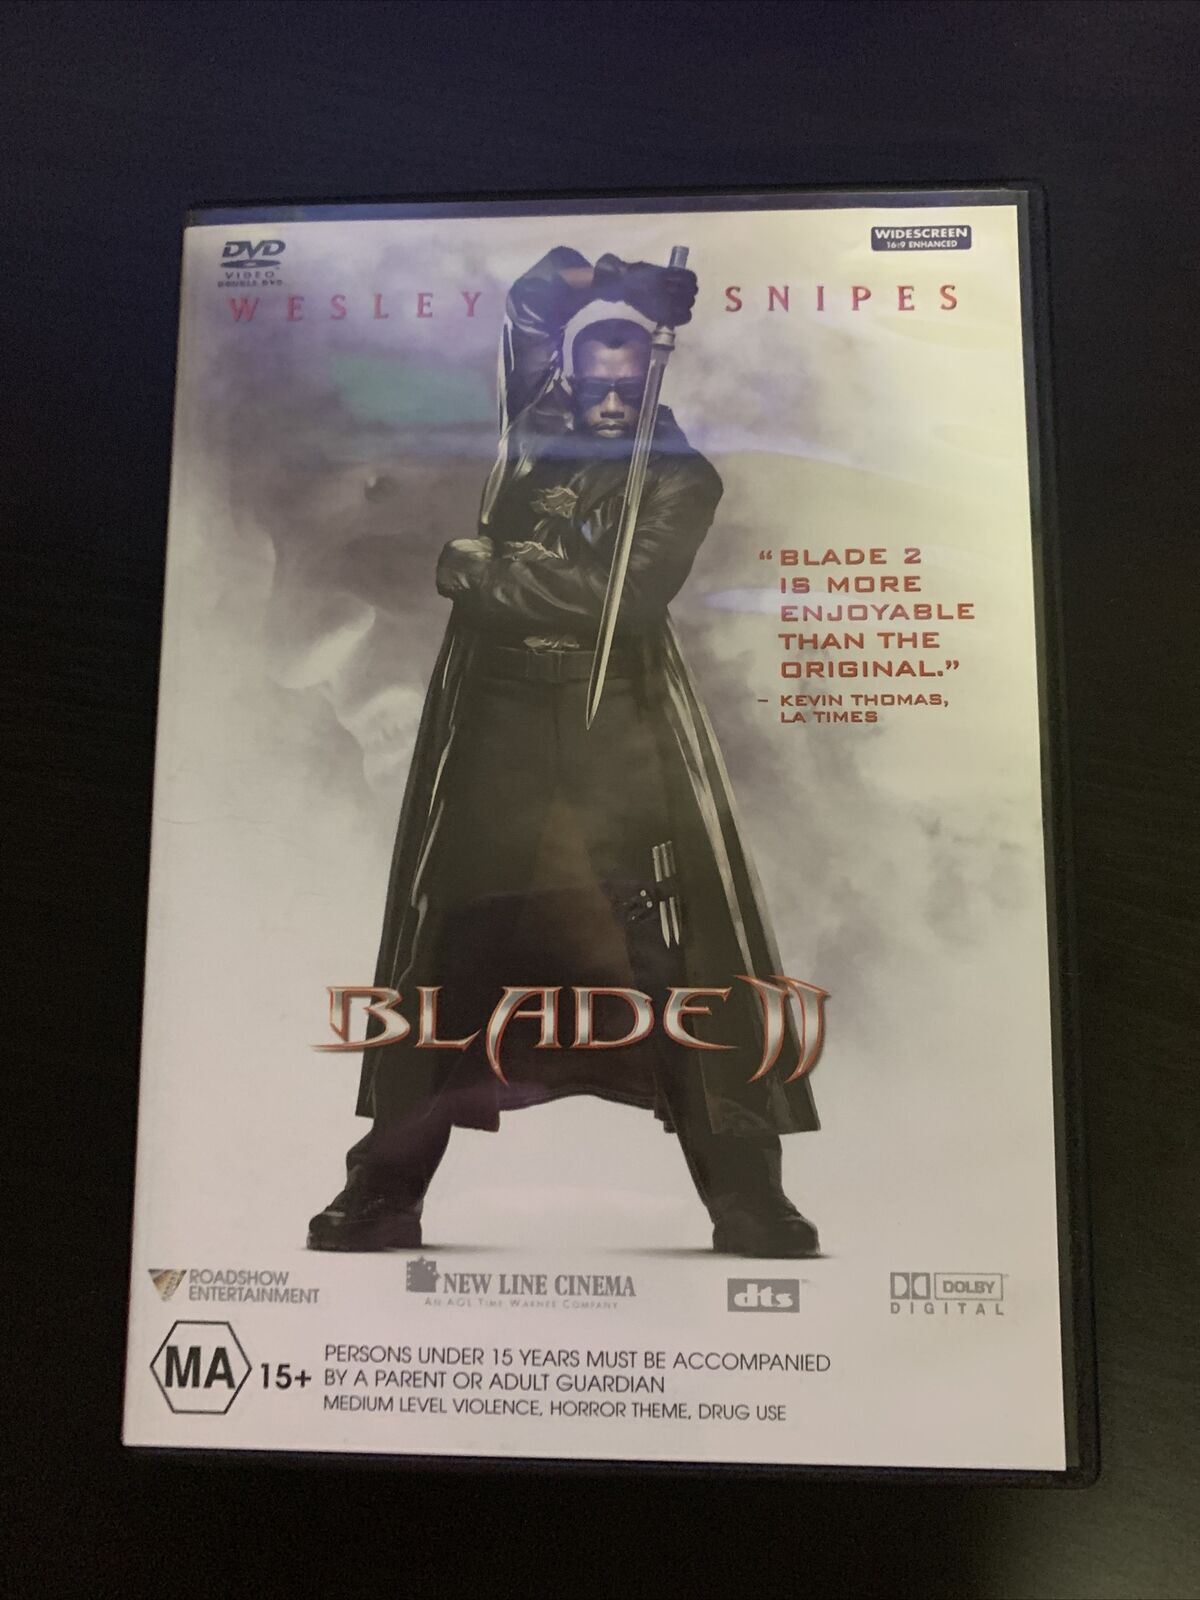 Blade Trilogy - The Ultimate Collection (DVD, 2005, 5-Disc Set) Region 4